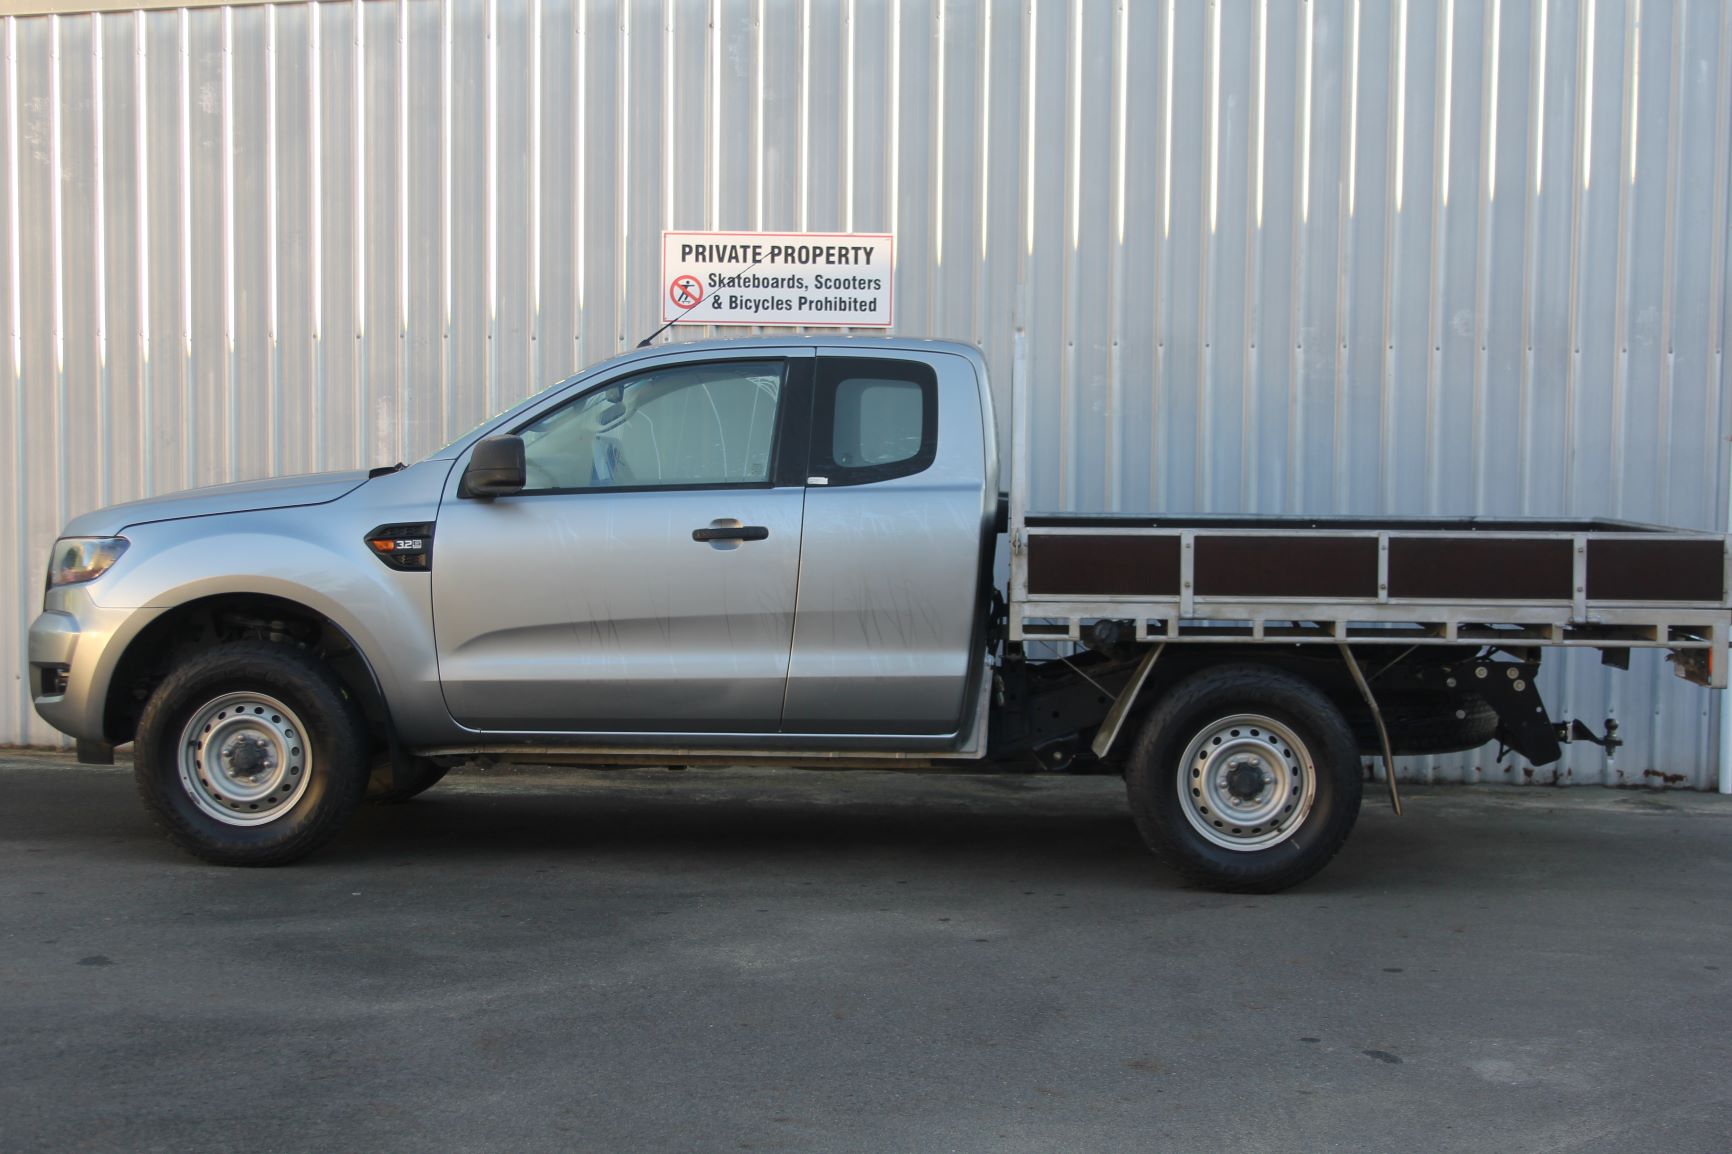 Ford Ranger PX2 4WD 2016 for sale in Auckland